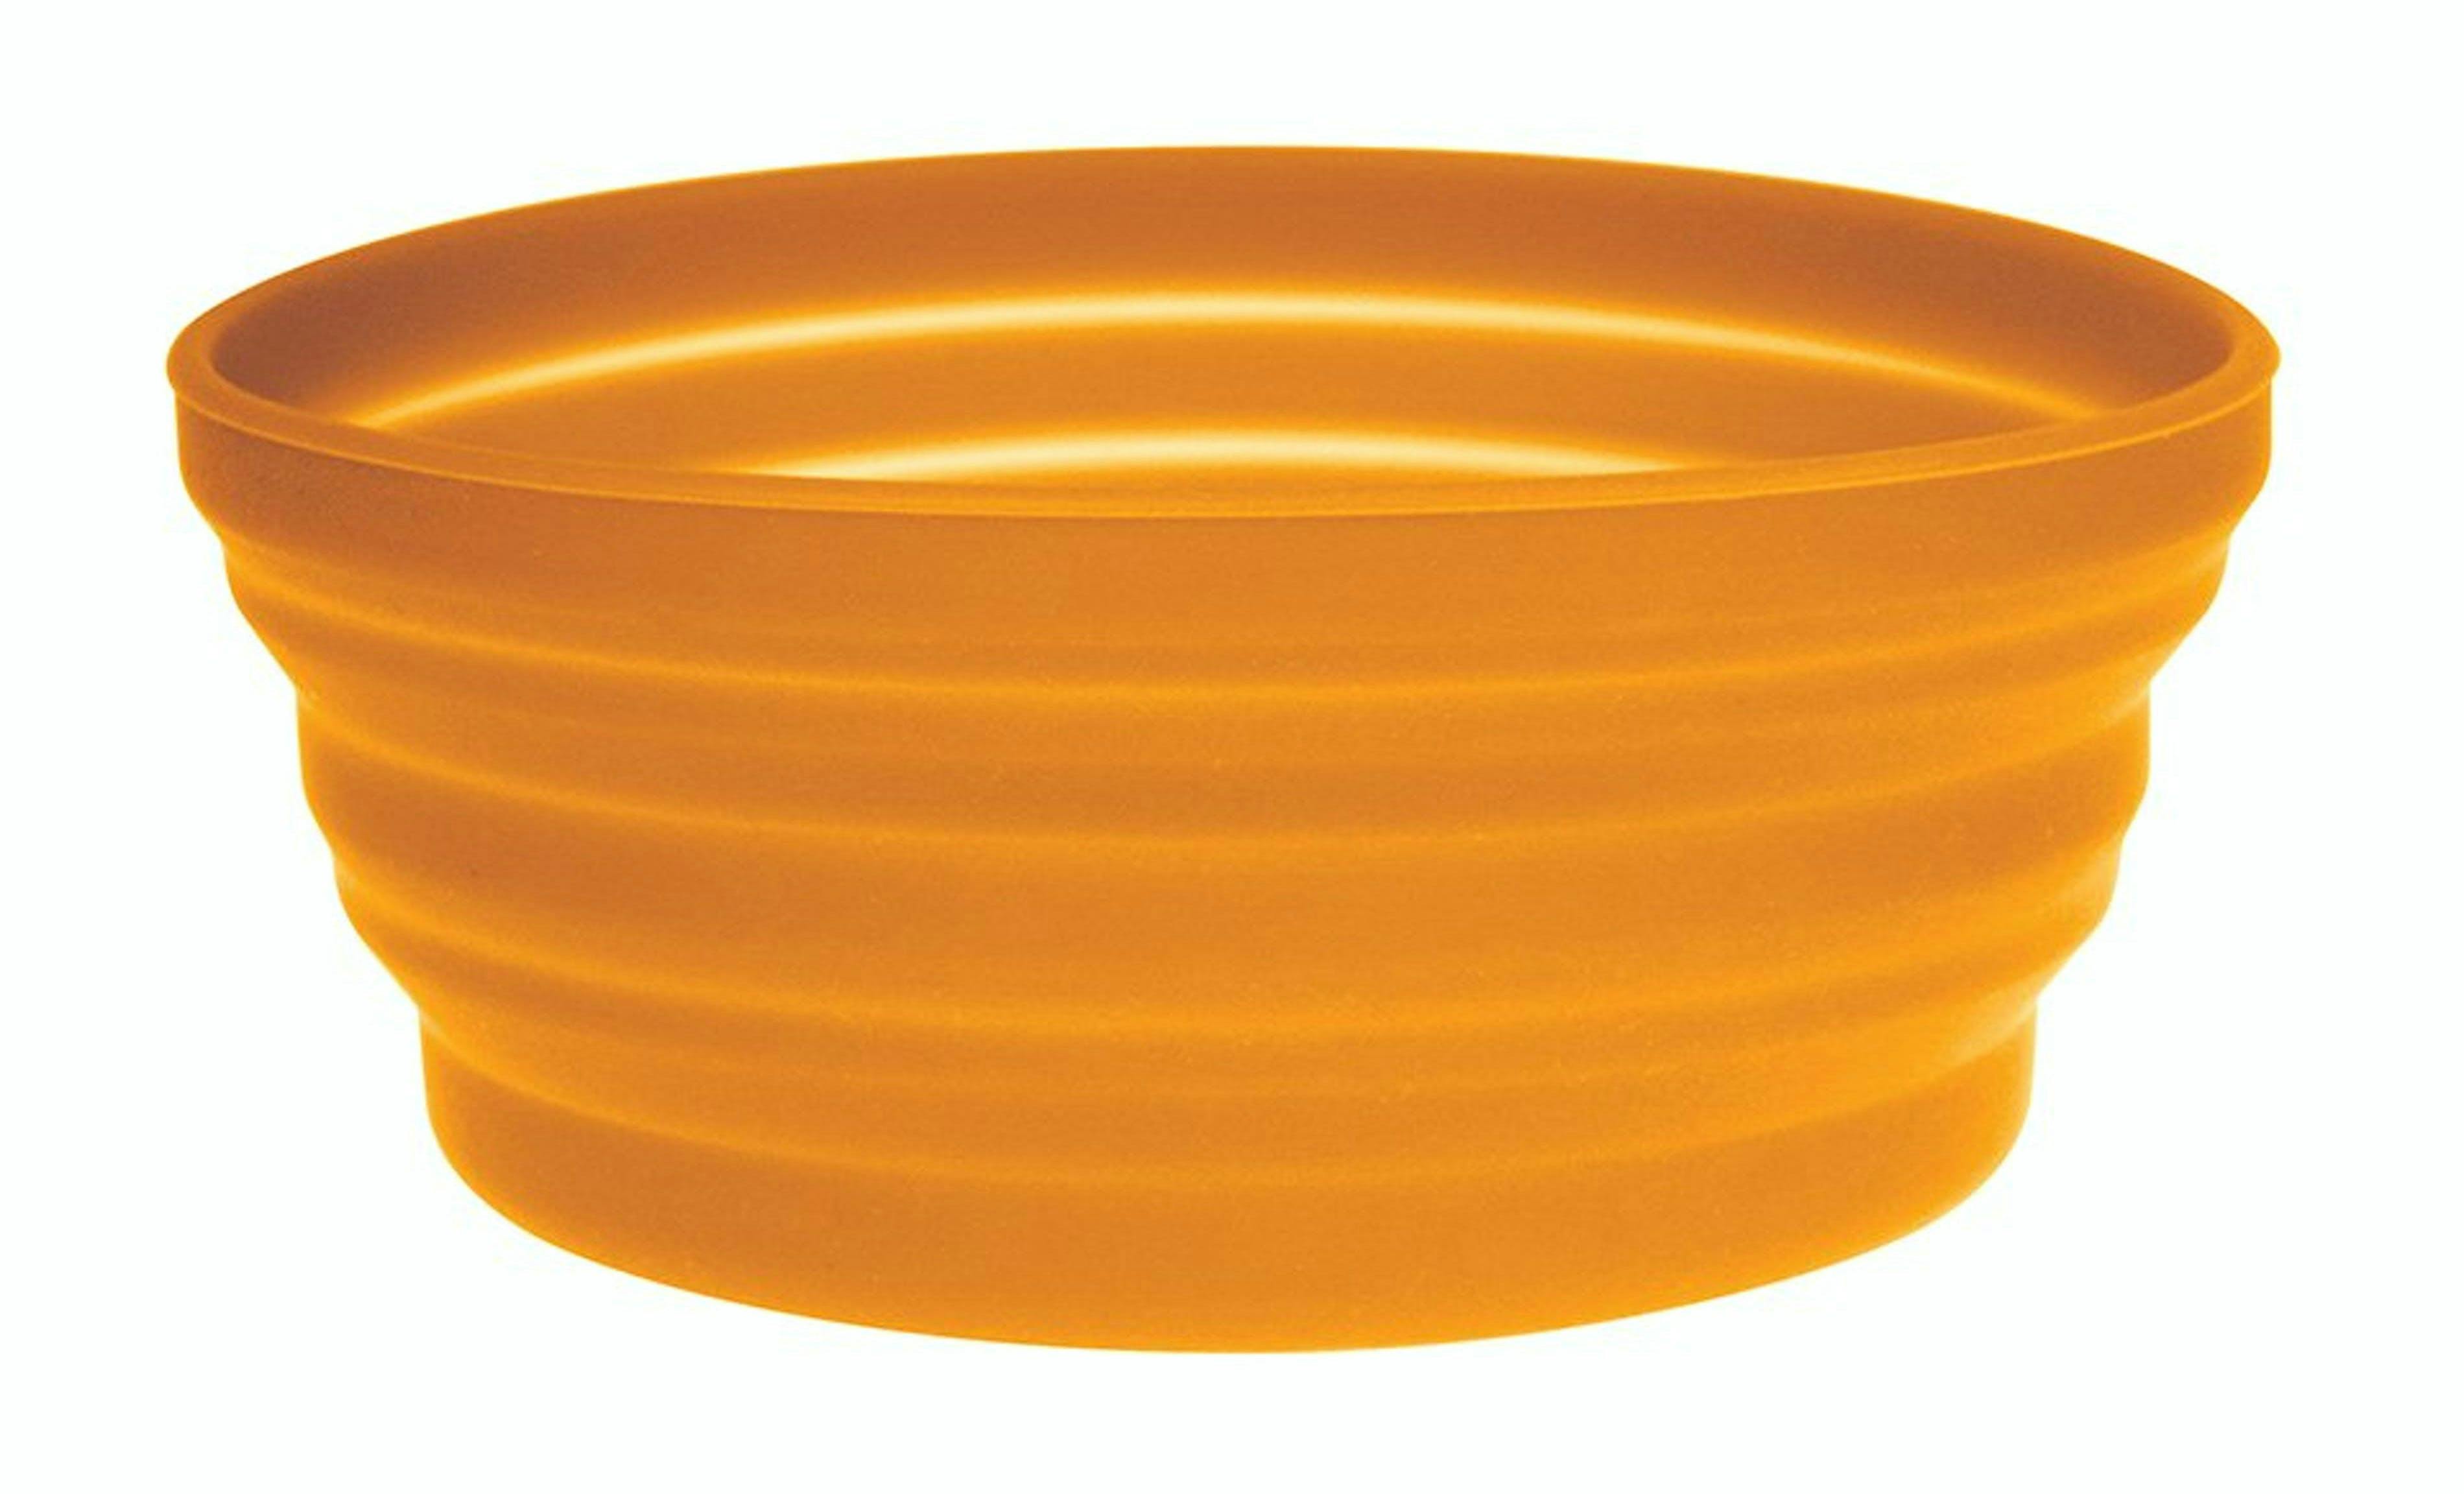 Ultimate Survival collapsible bowl